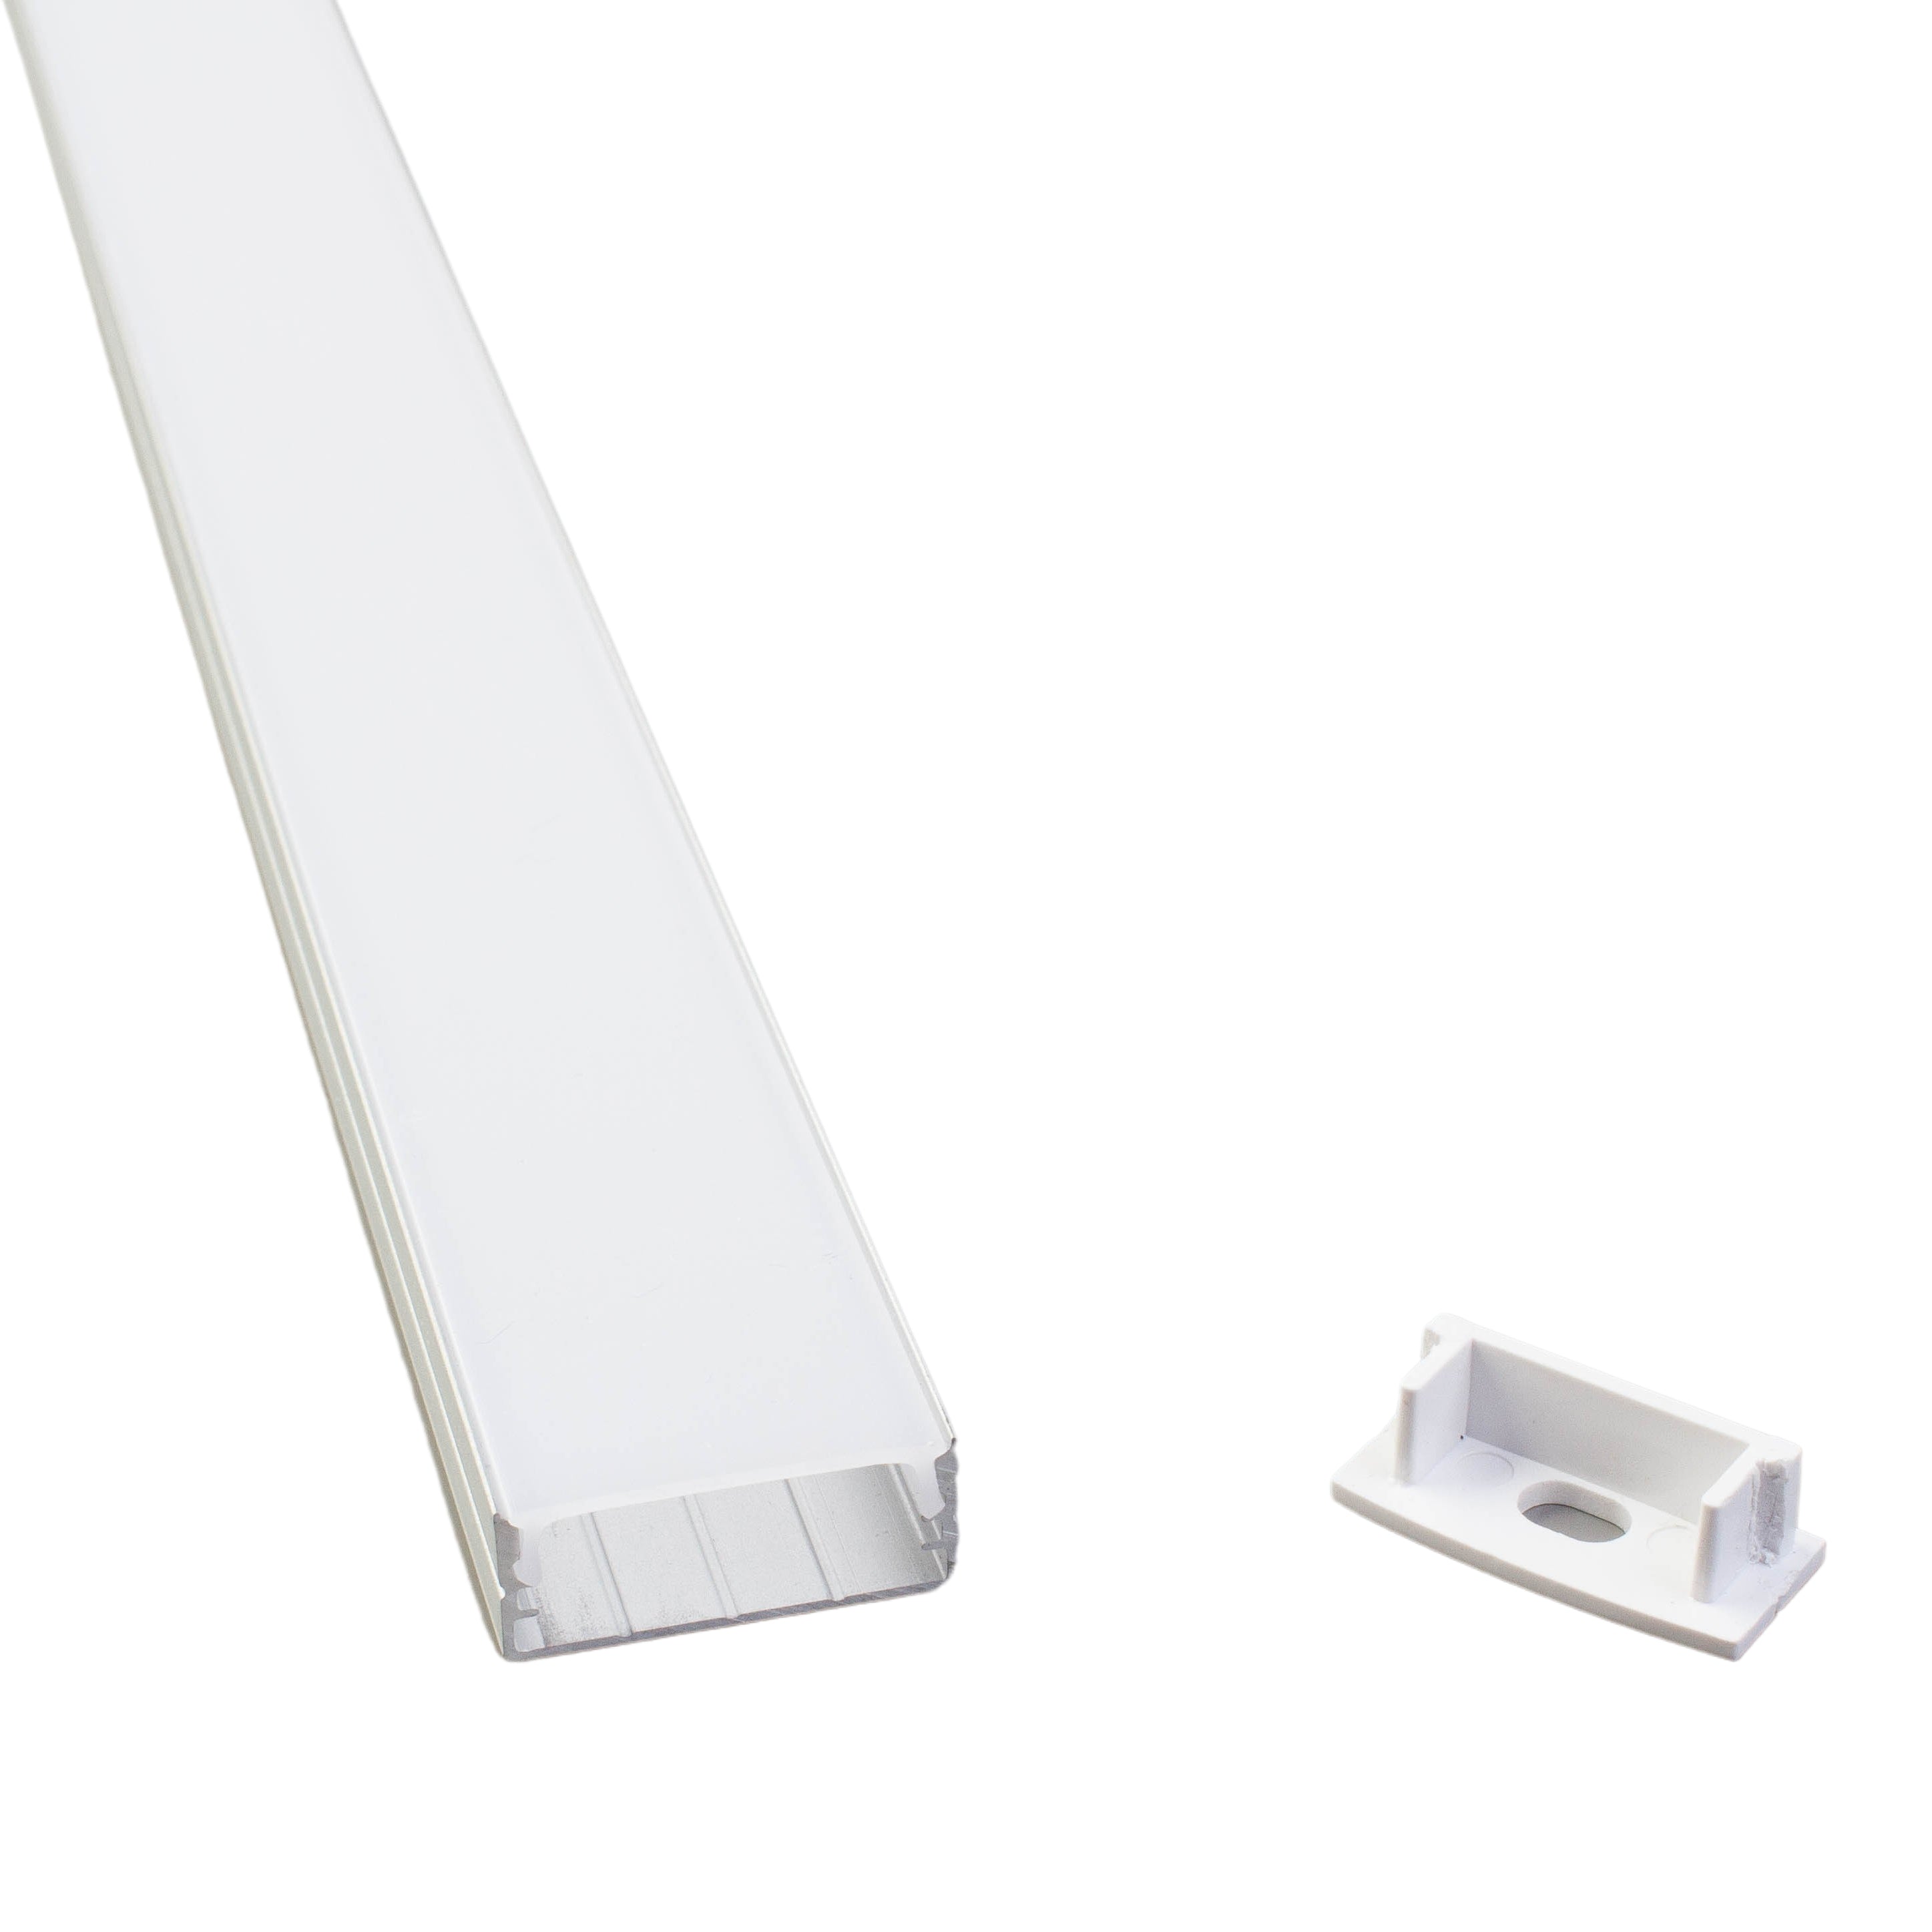 40 Extra Wide Aluminum Channel with Cover for LED Strip Light - Fits up to  20mm Strip (6pk)